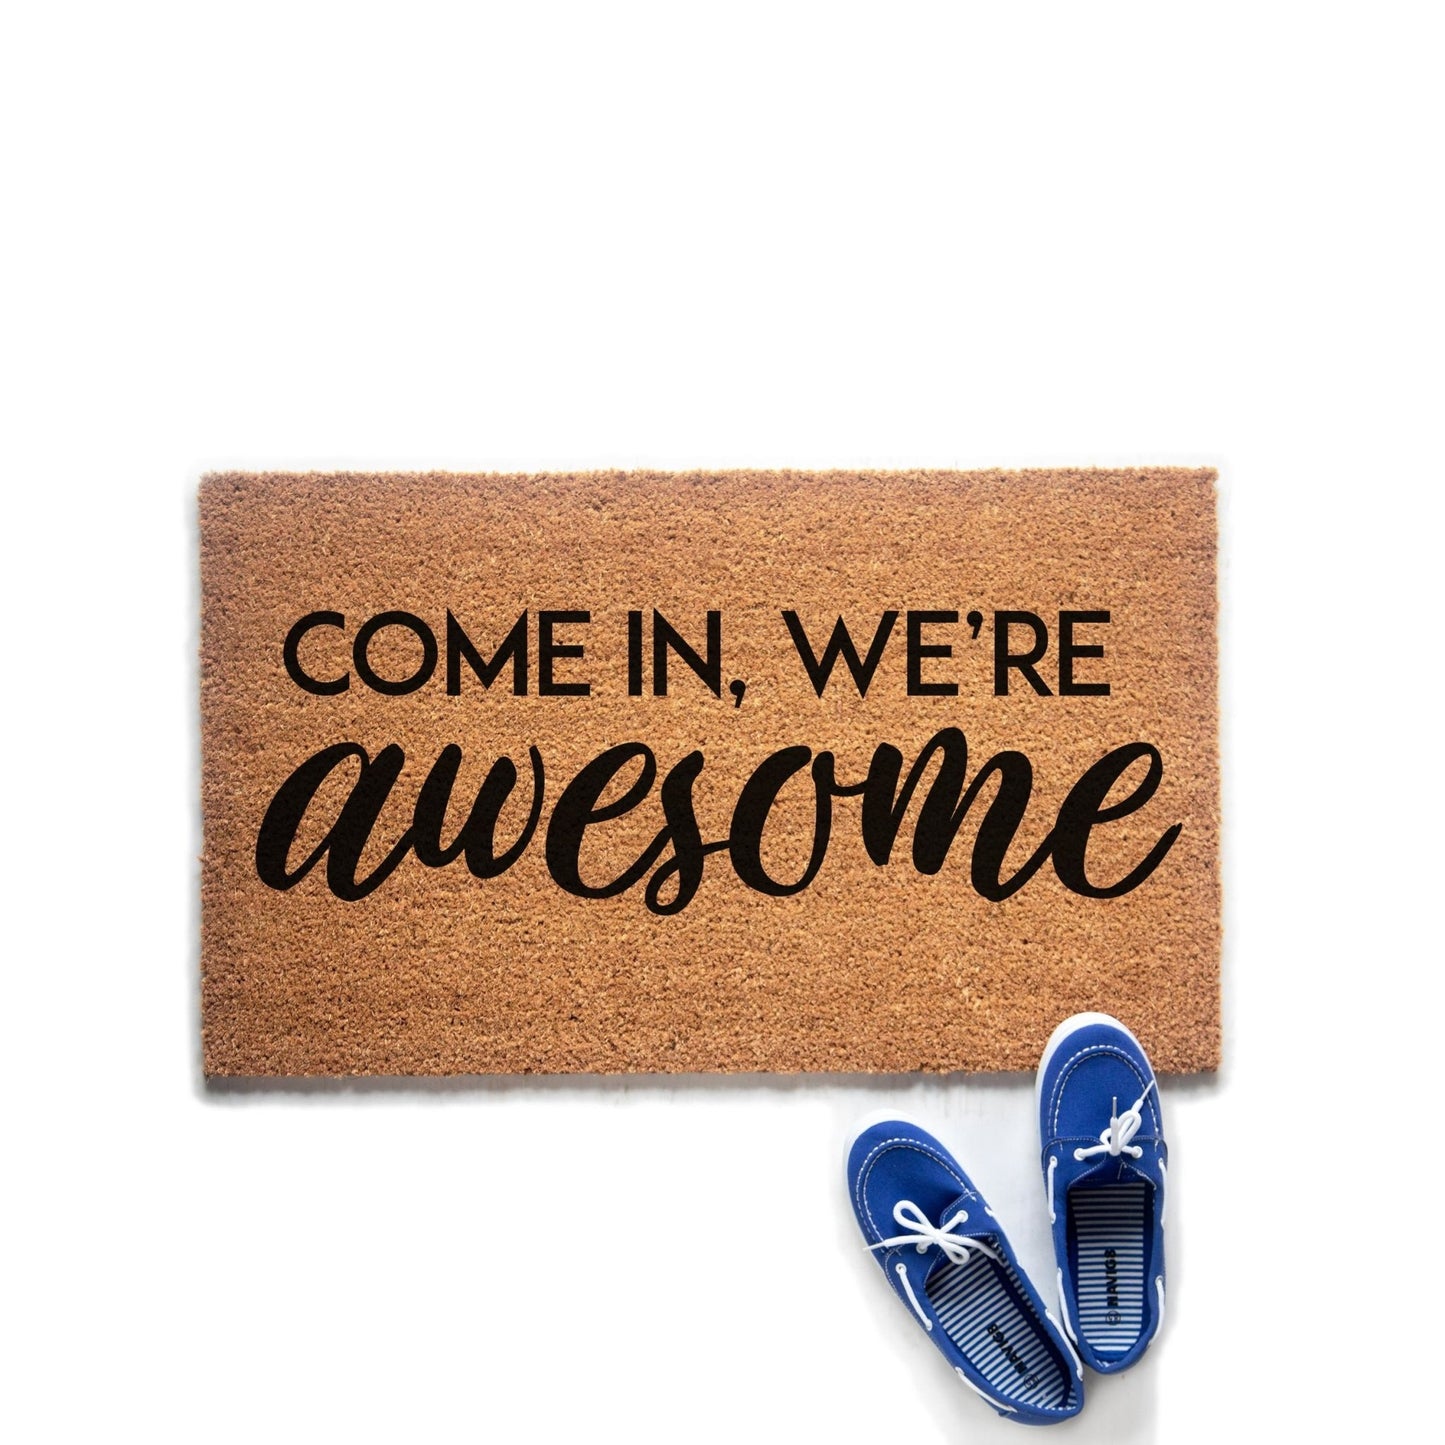 Come In, We're Awesome Doormat